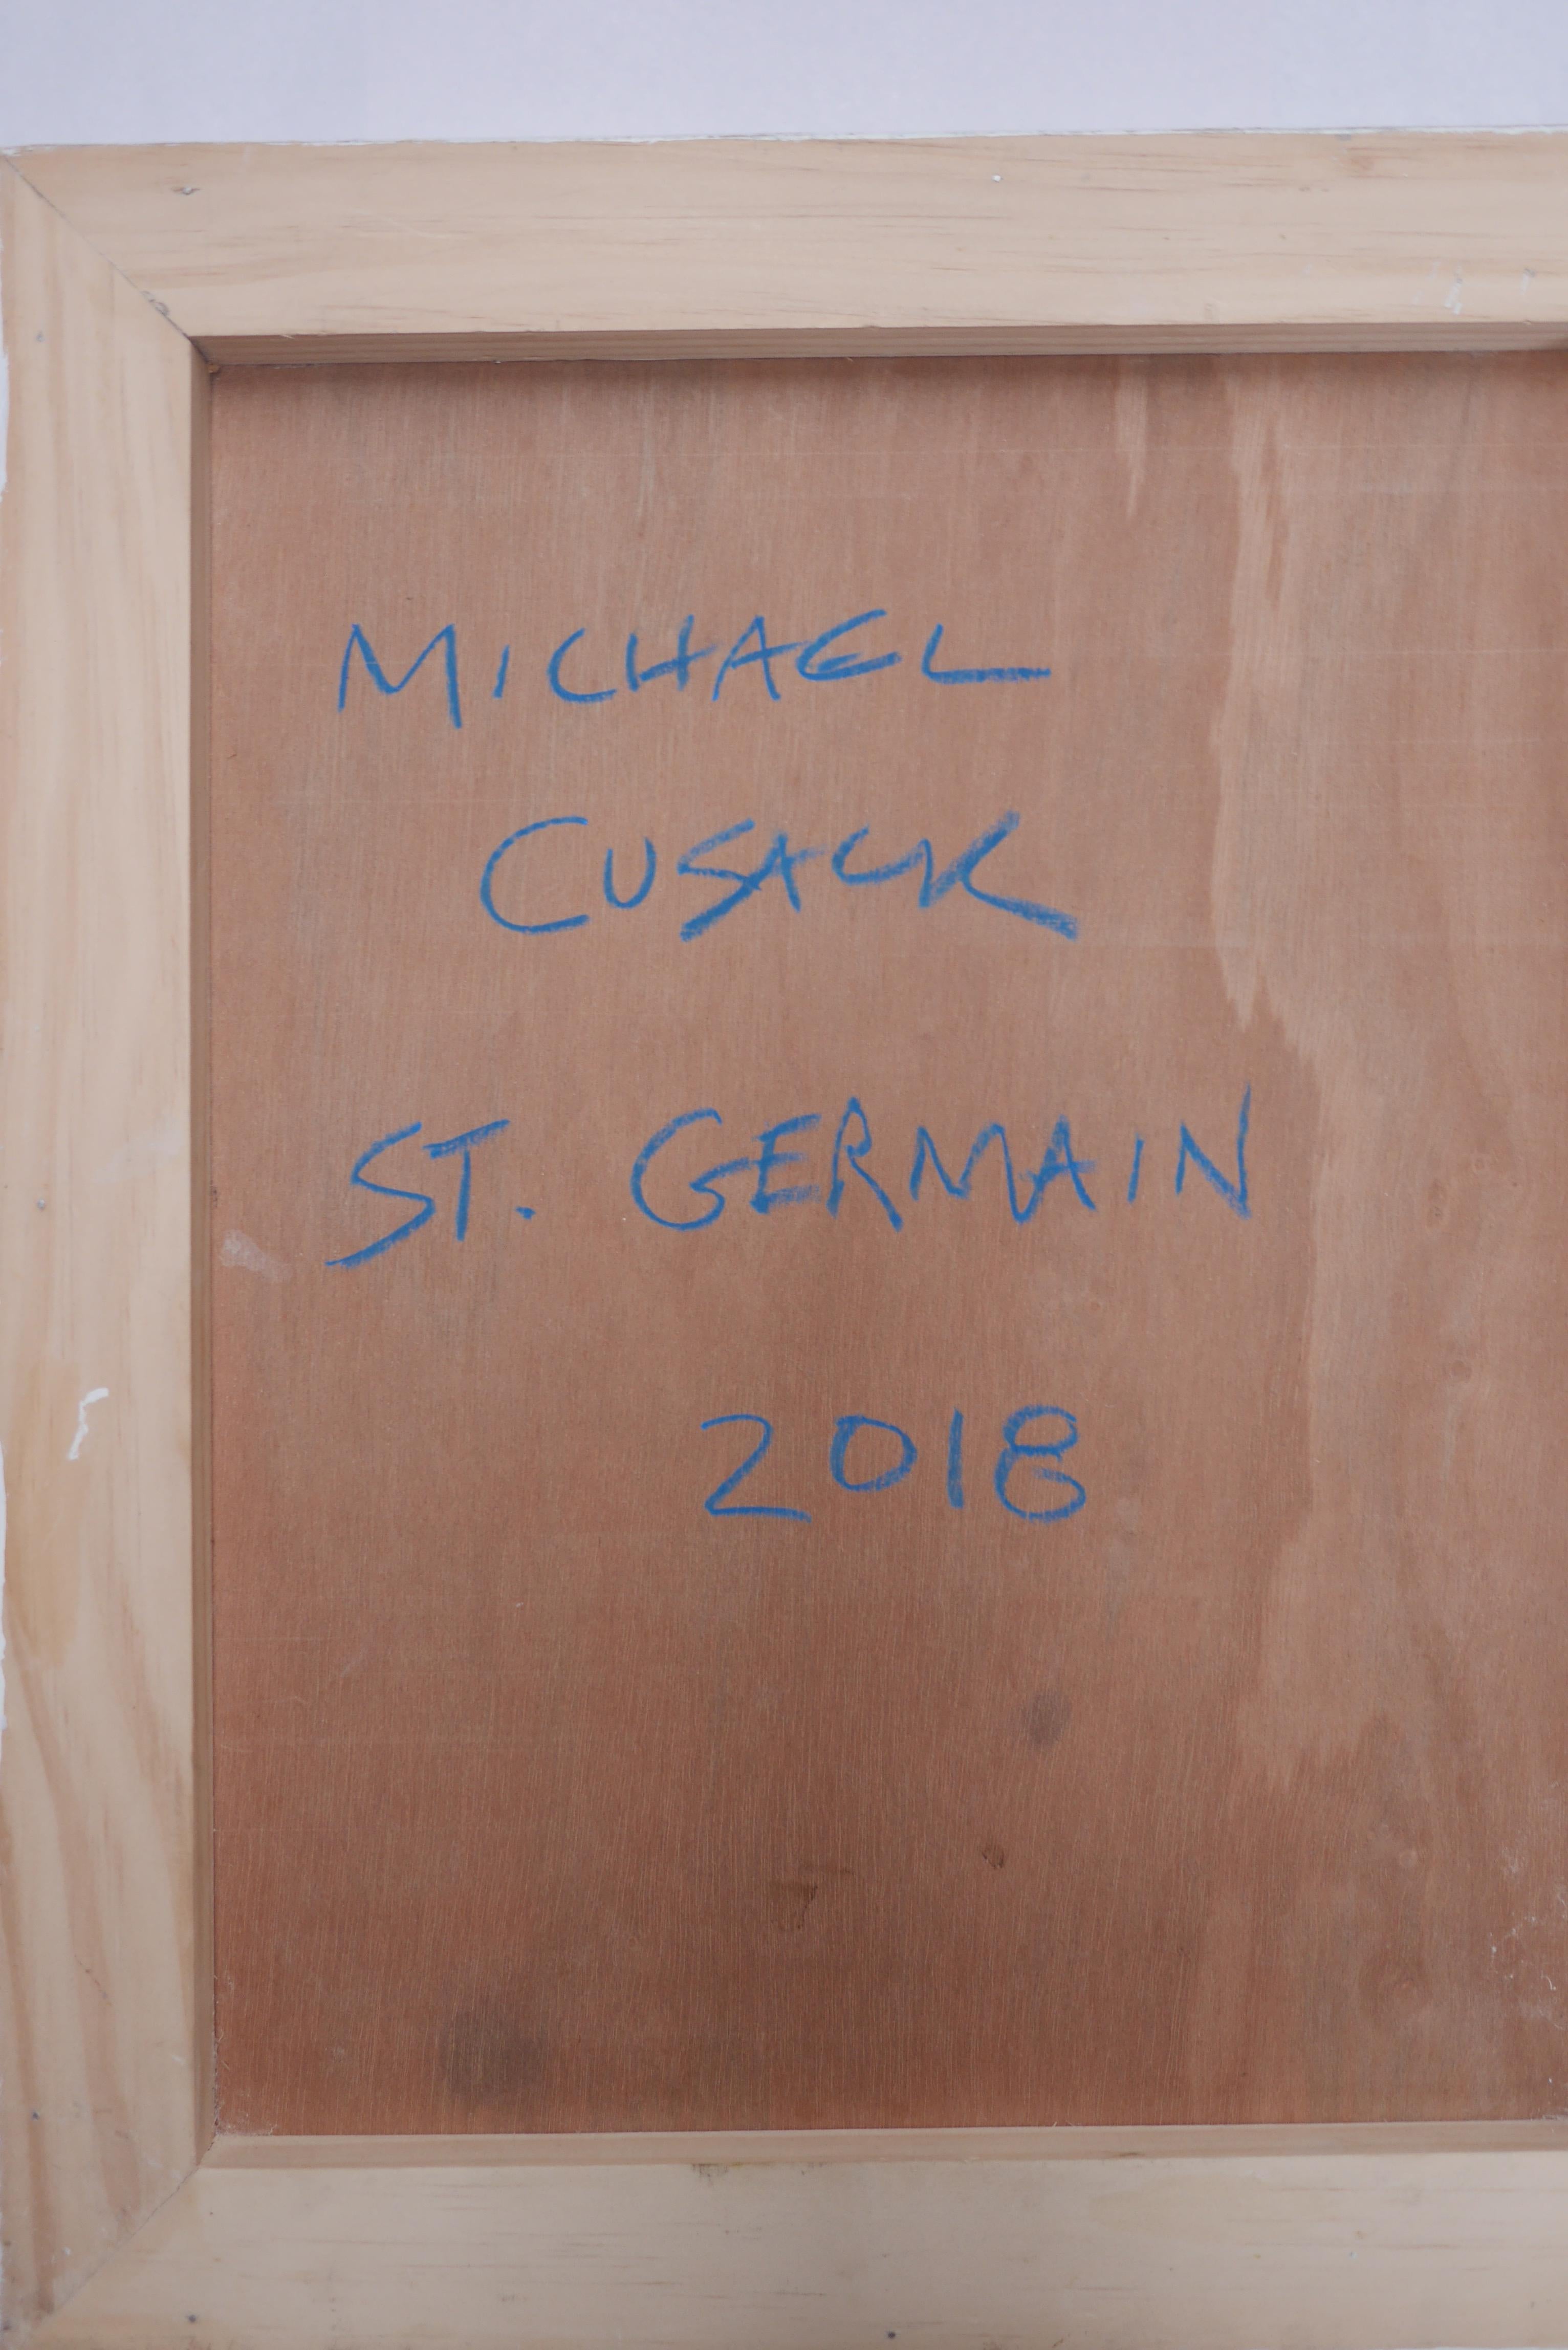 St.Germain (Abstract painting) - Brown Abstract Painting by Michael Cusack